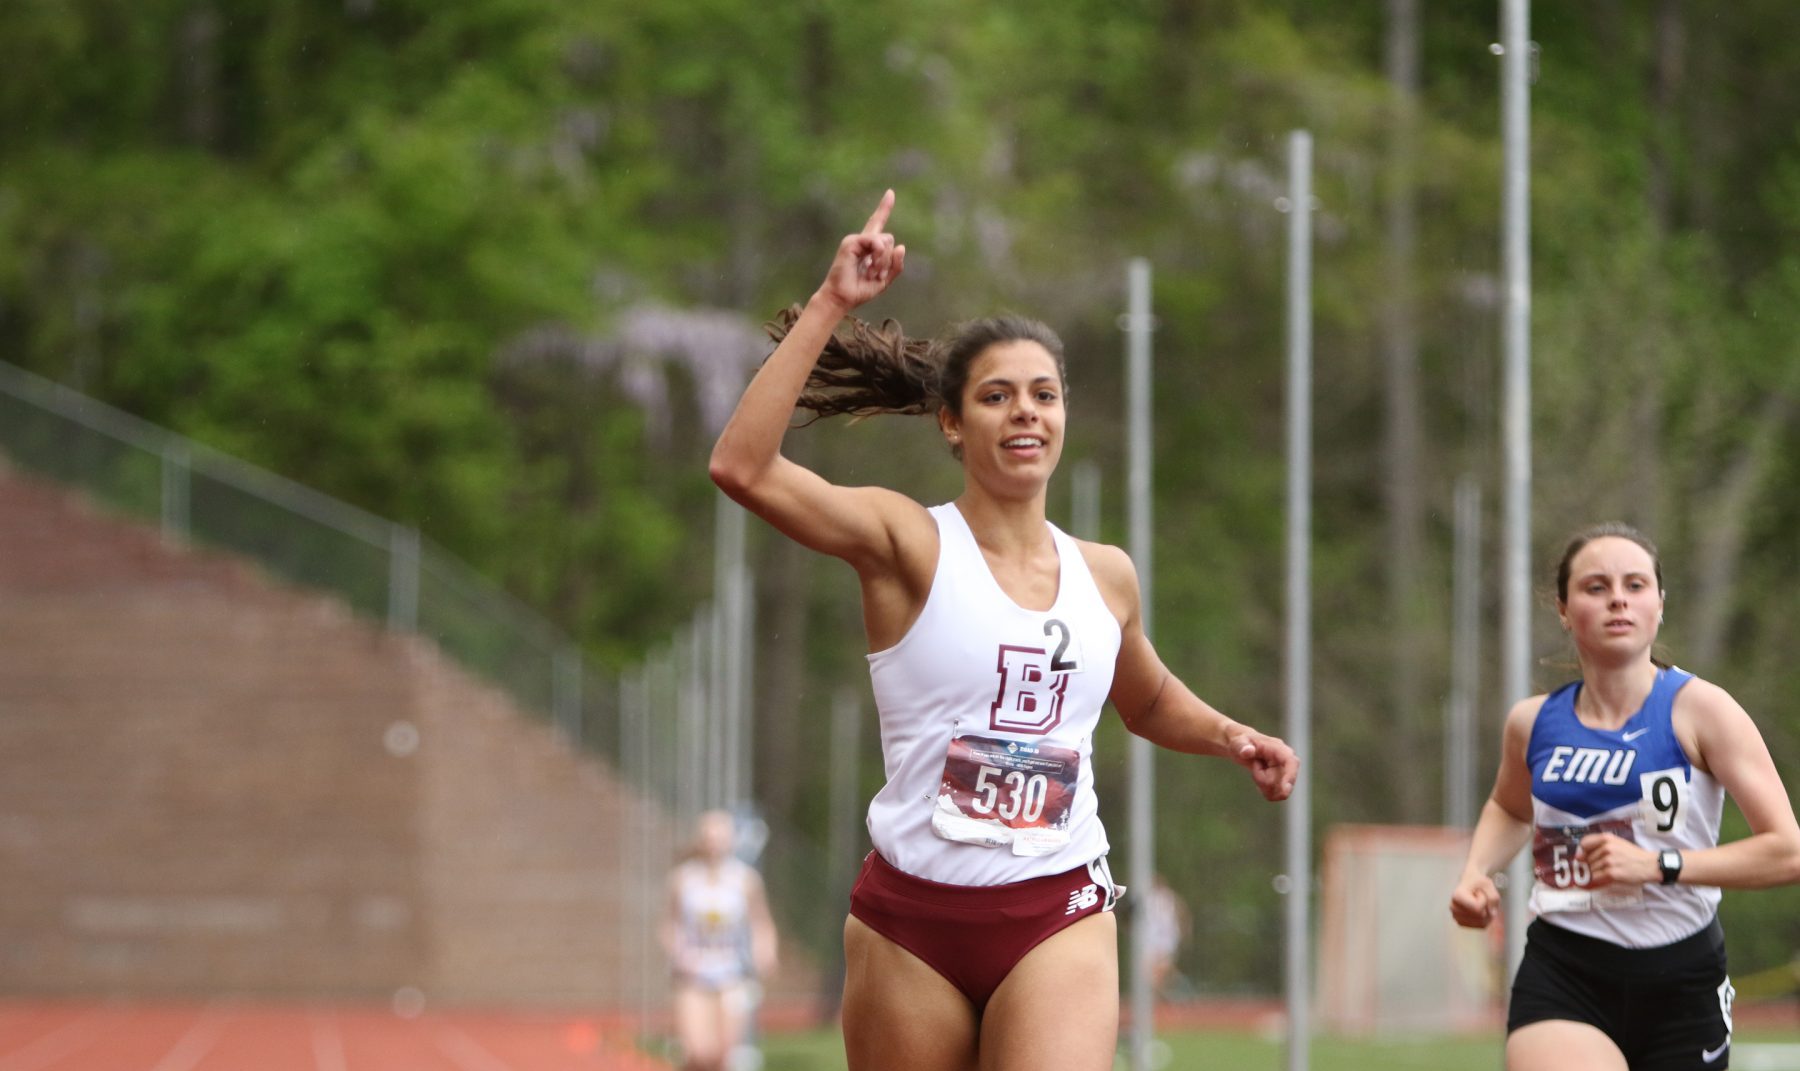 Calista Ariel ’20 joins elite track club after losing her senior season to COVID-19